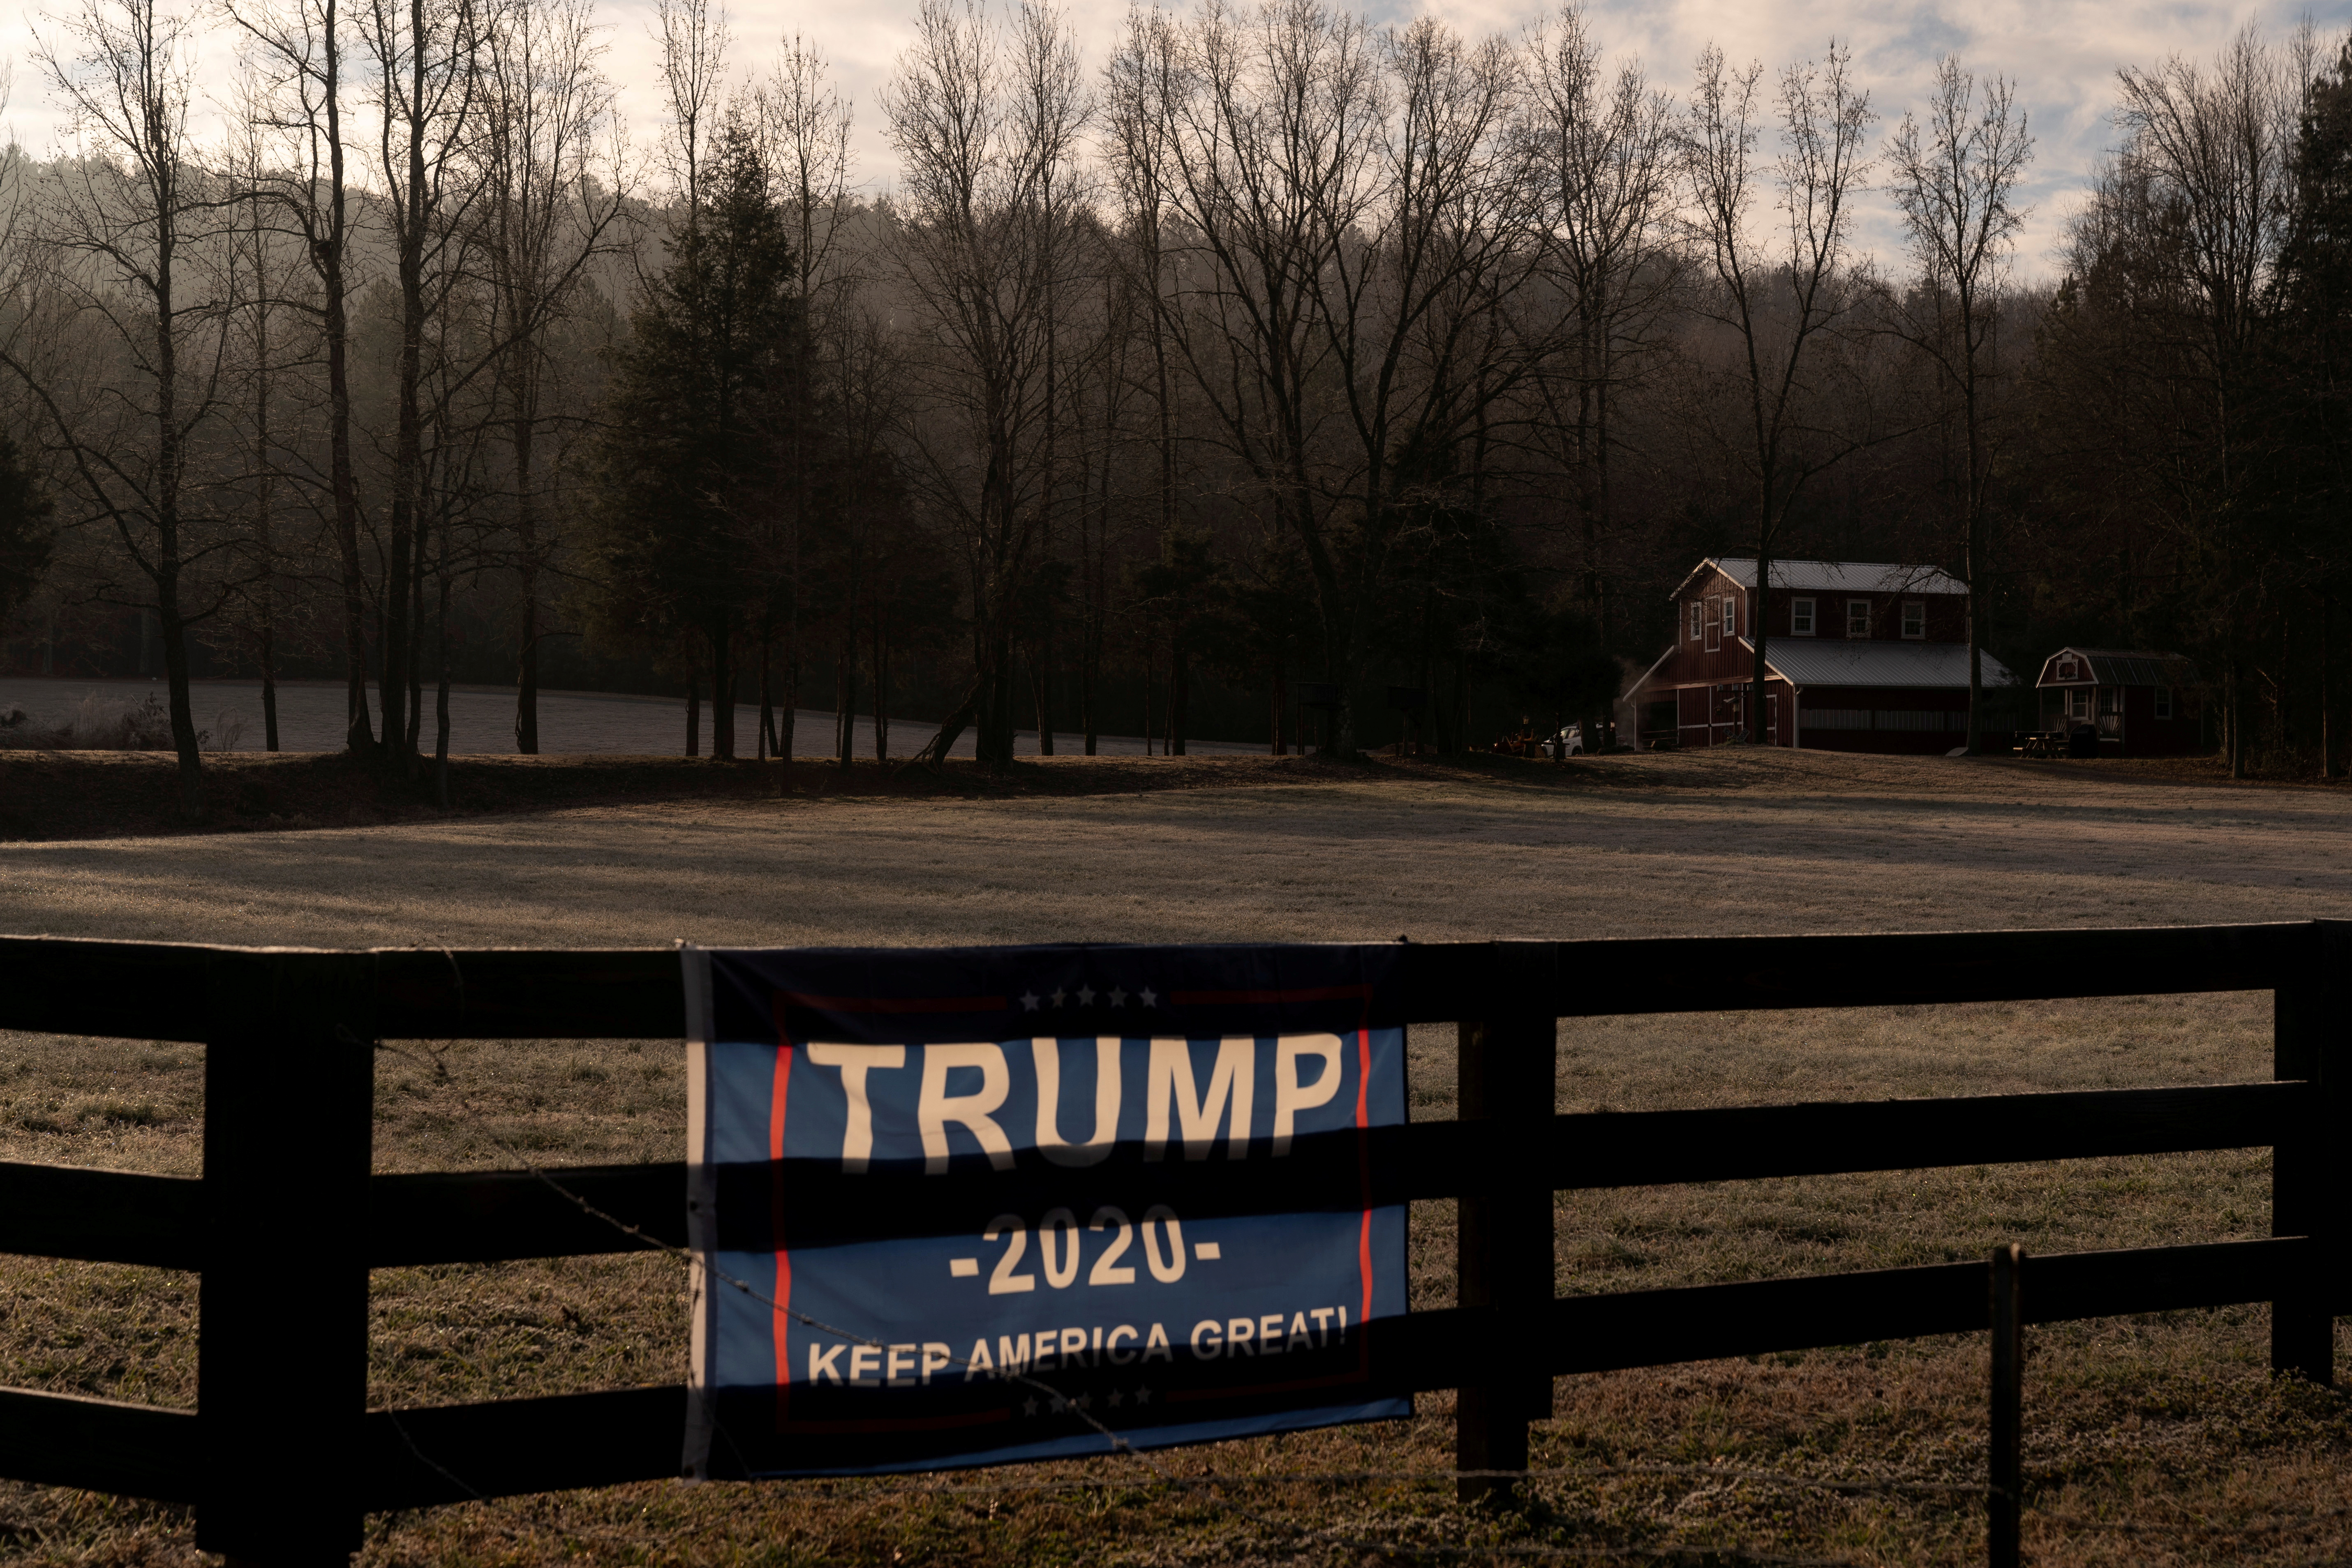 A campaign flag for former president Donald Trump is seen on a fence in front of a barn near Rome